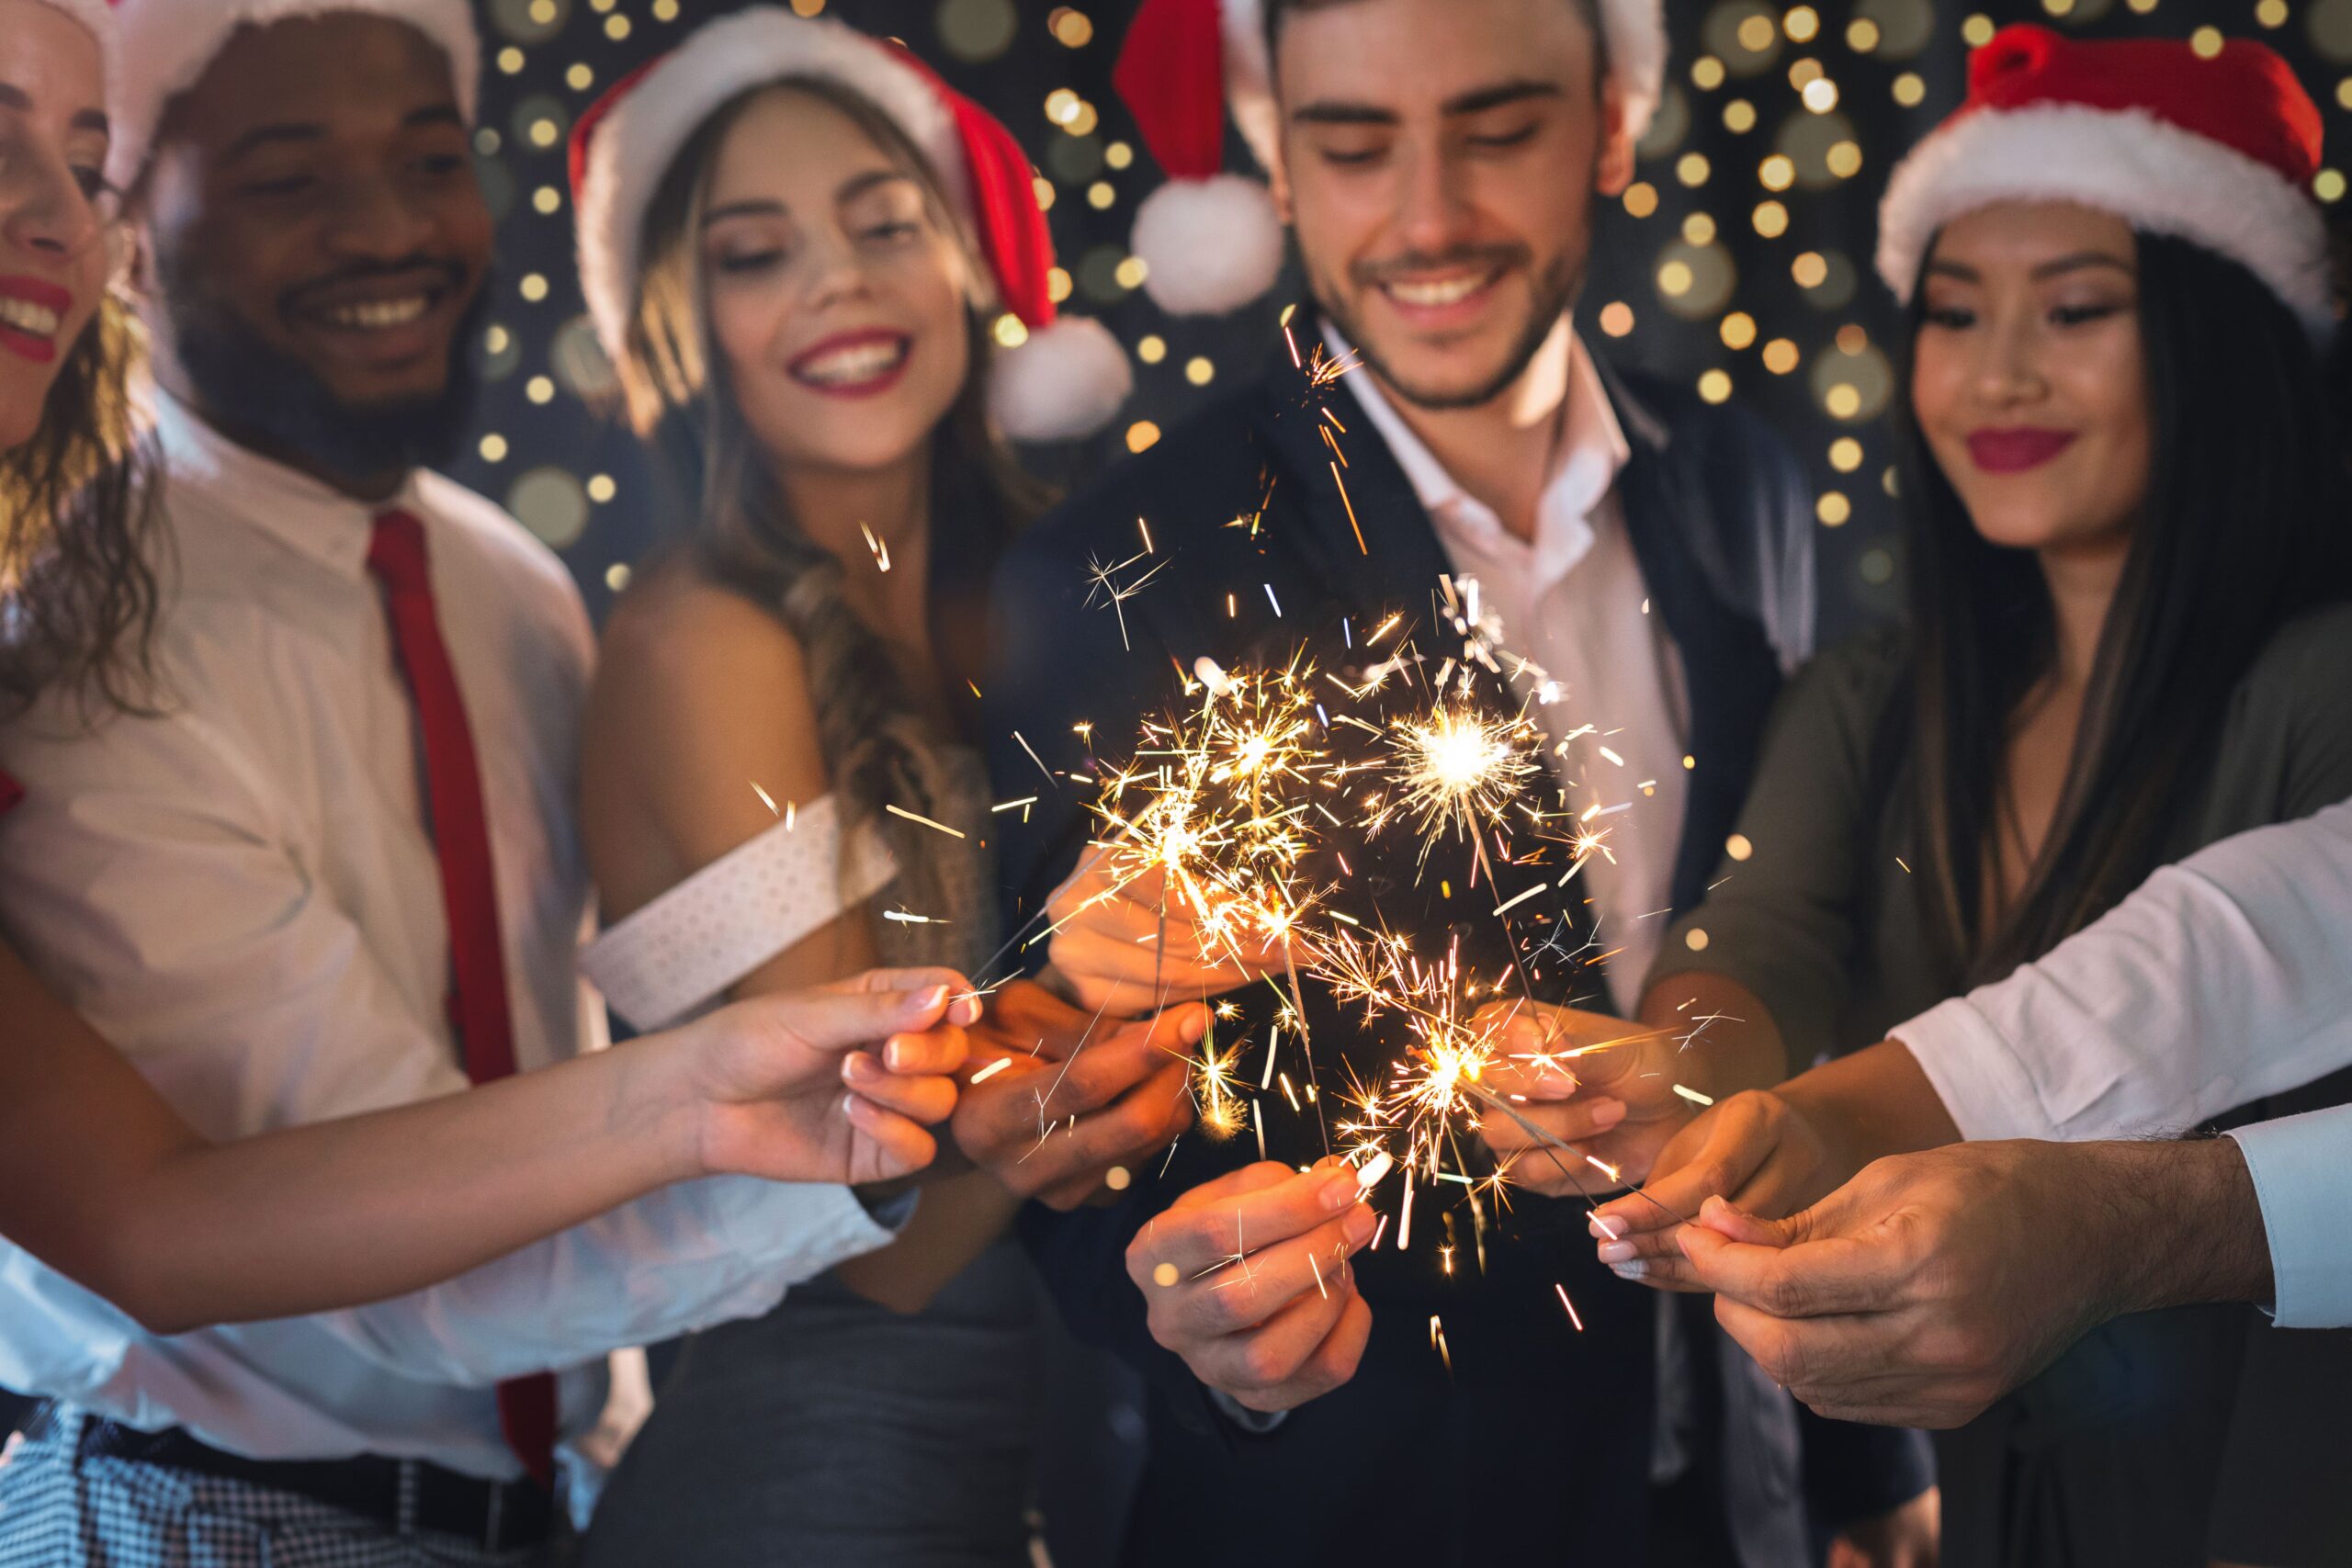 A manager’s guide to a fun Christmas at the office